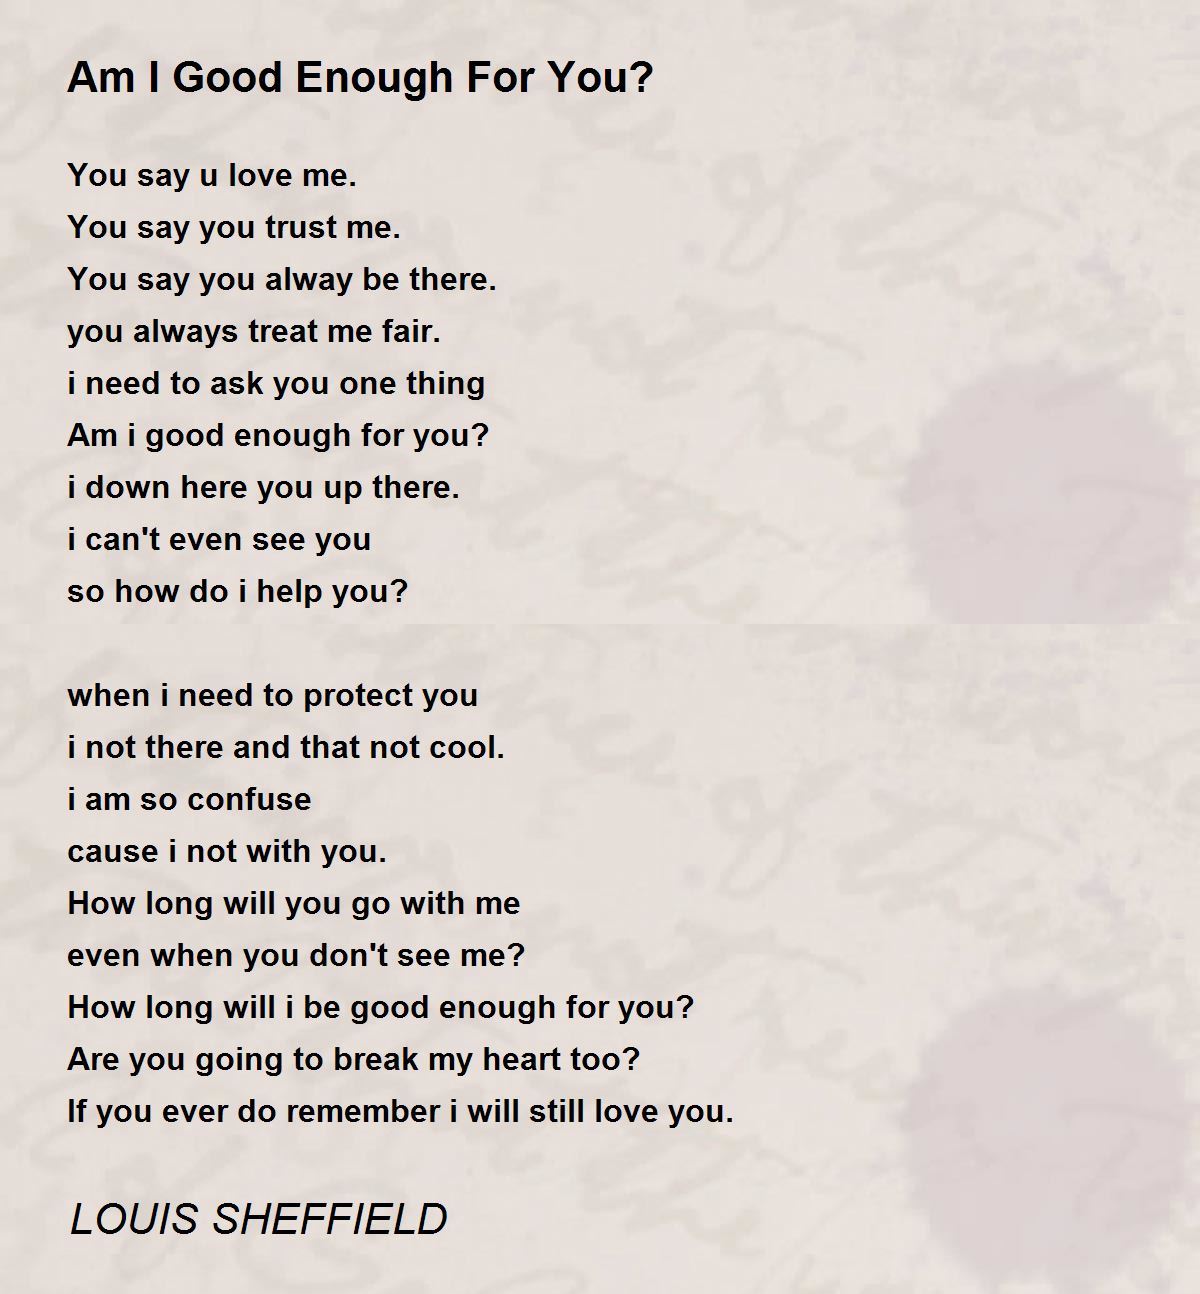 Am I Good Enough For You By Louis Sheffield Am I Good Enough For You Poem